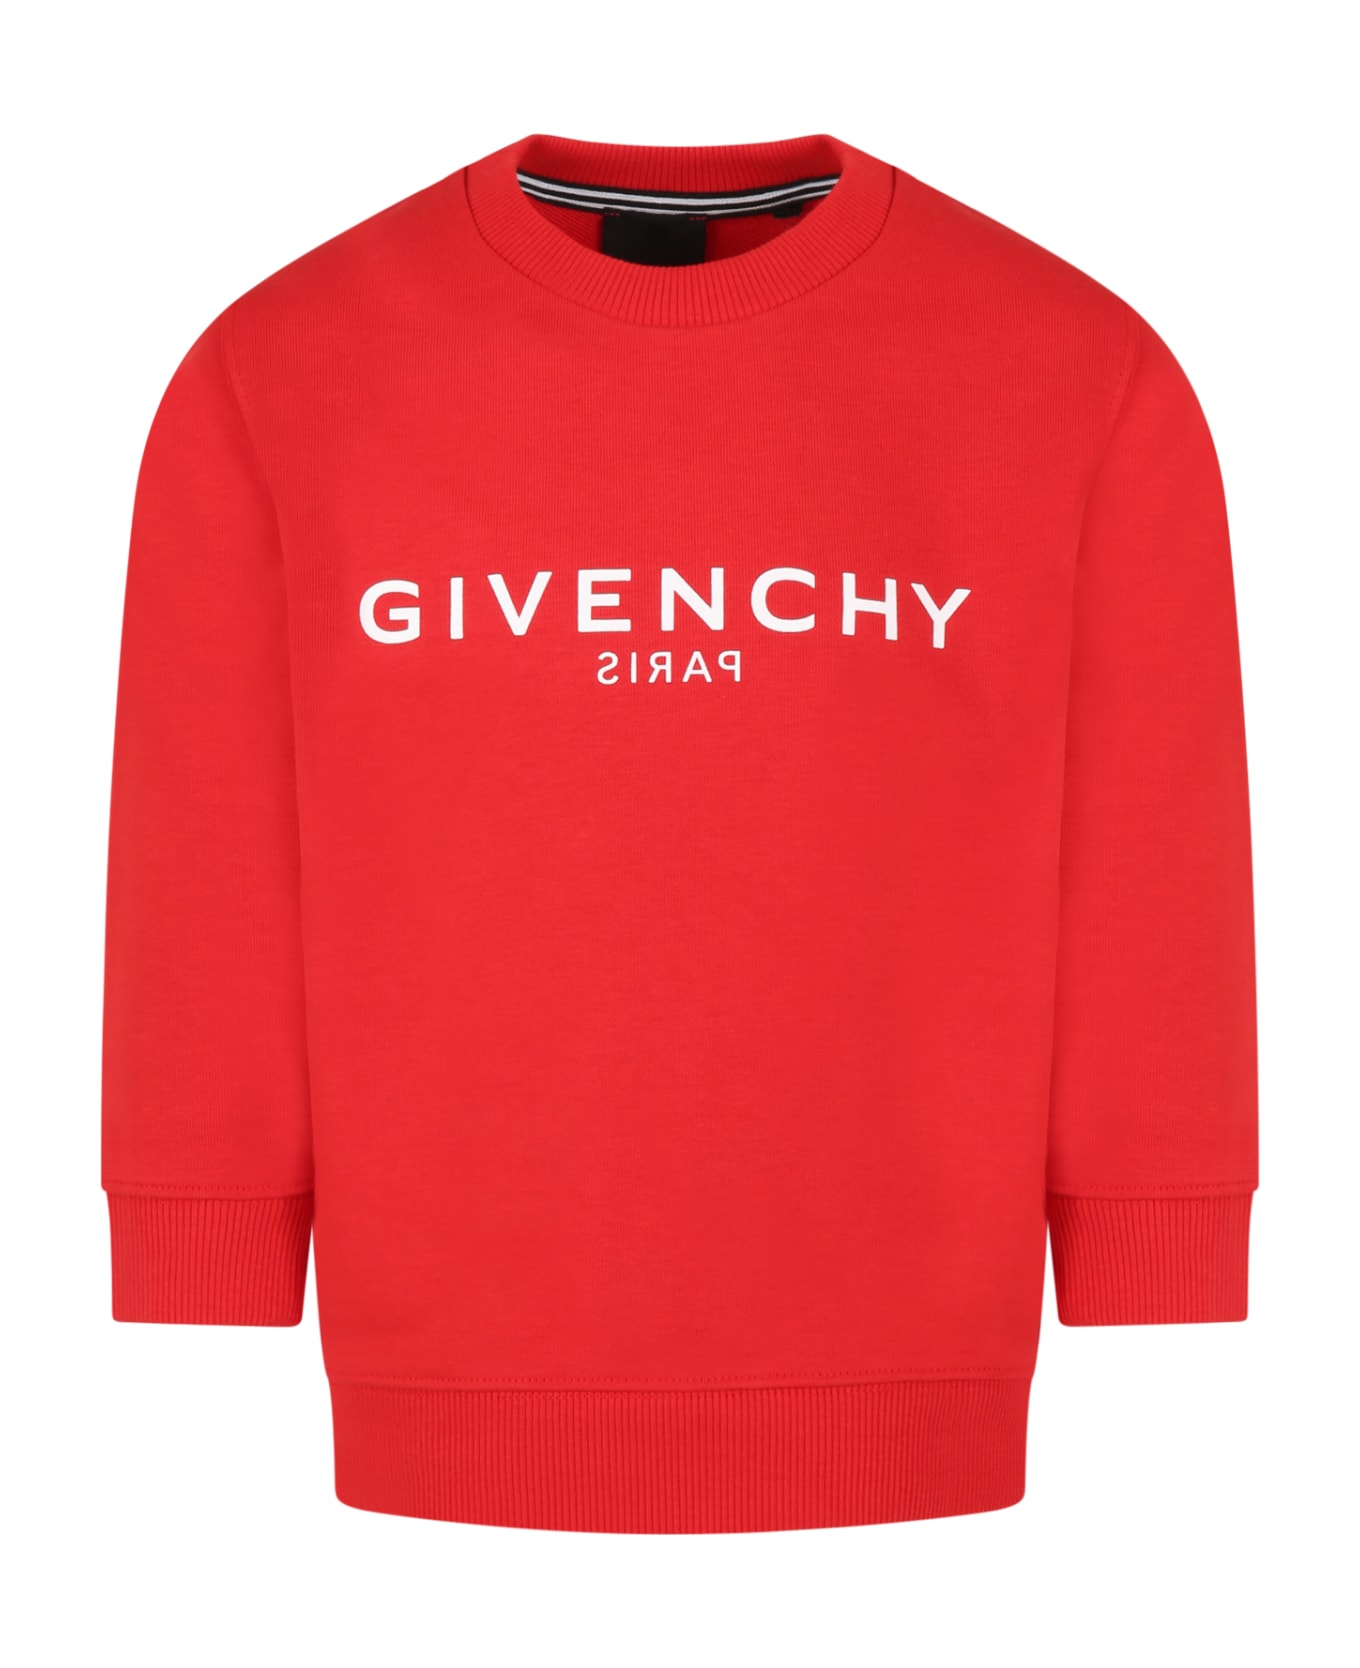 Givenchy Red Sweatshirt For Boy With White Logo - Rosso